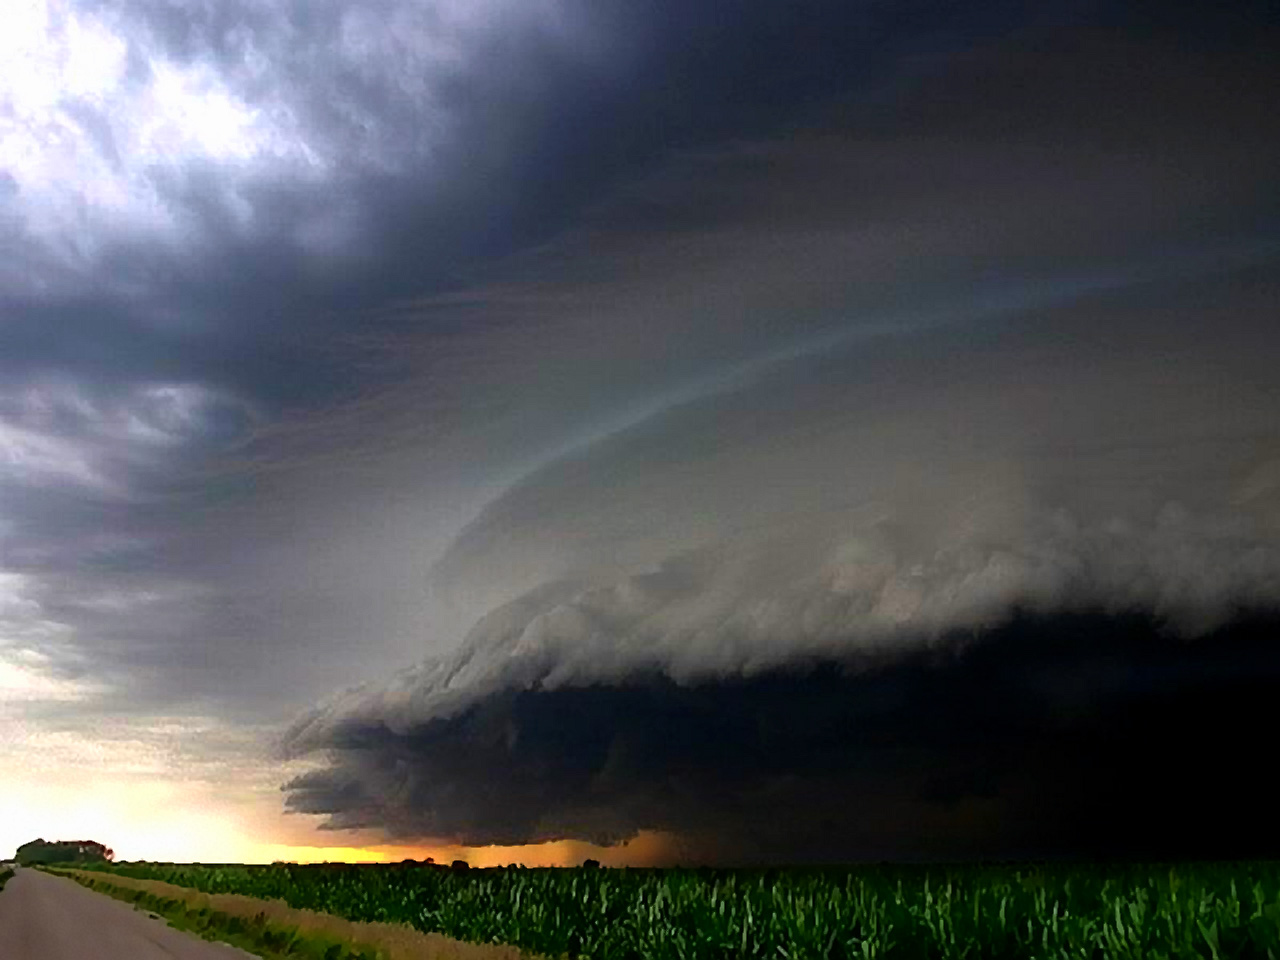 Large Wall Cloud   Weather Wallpaper Image featuring Tornadoes 1280x960